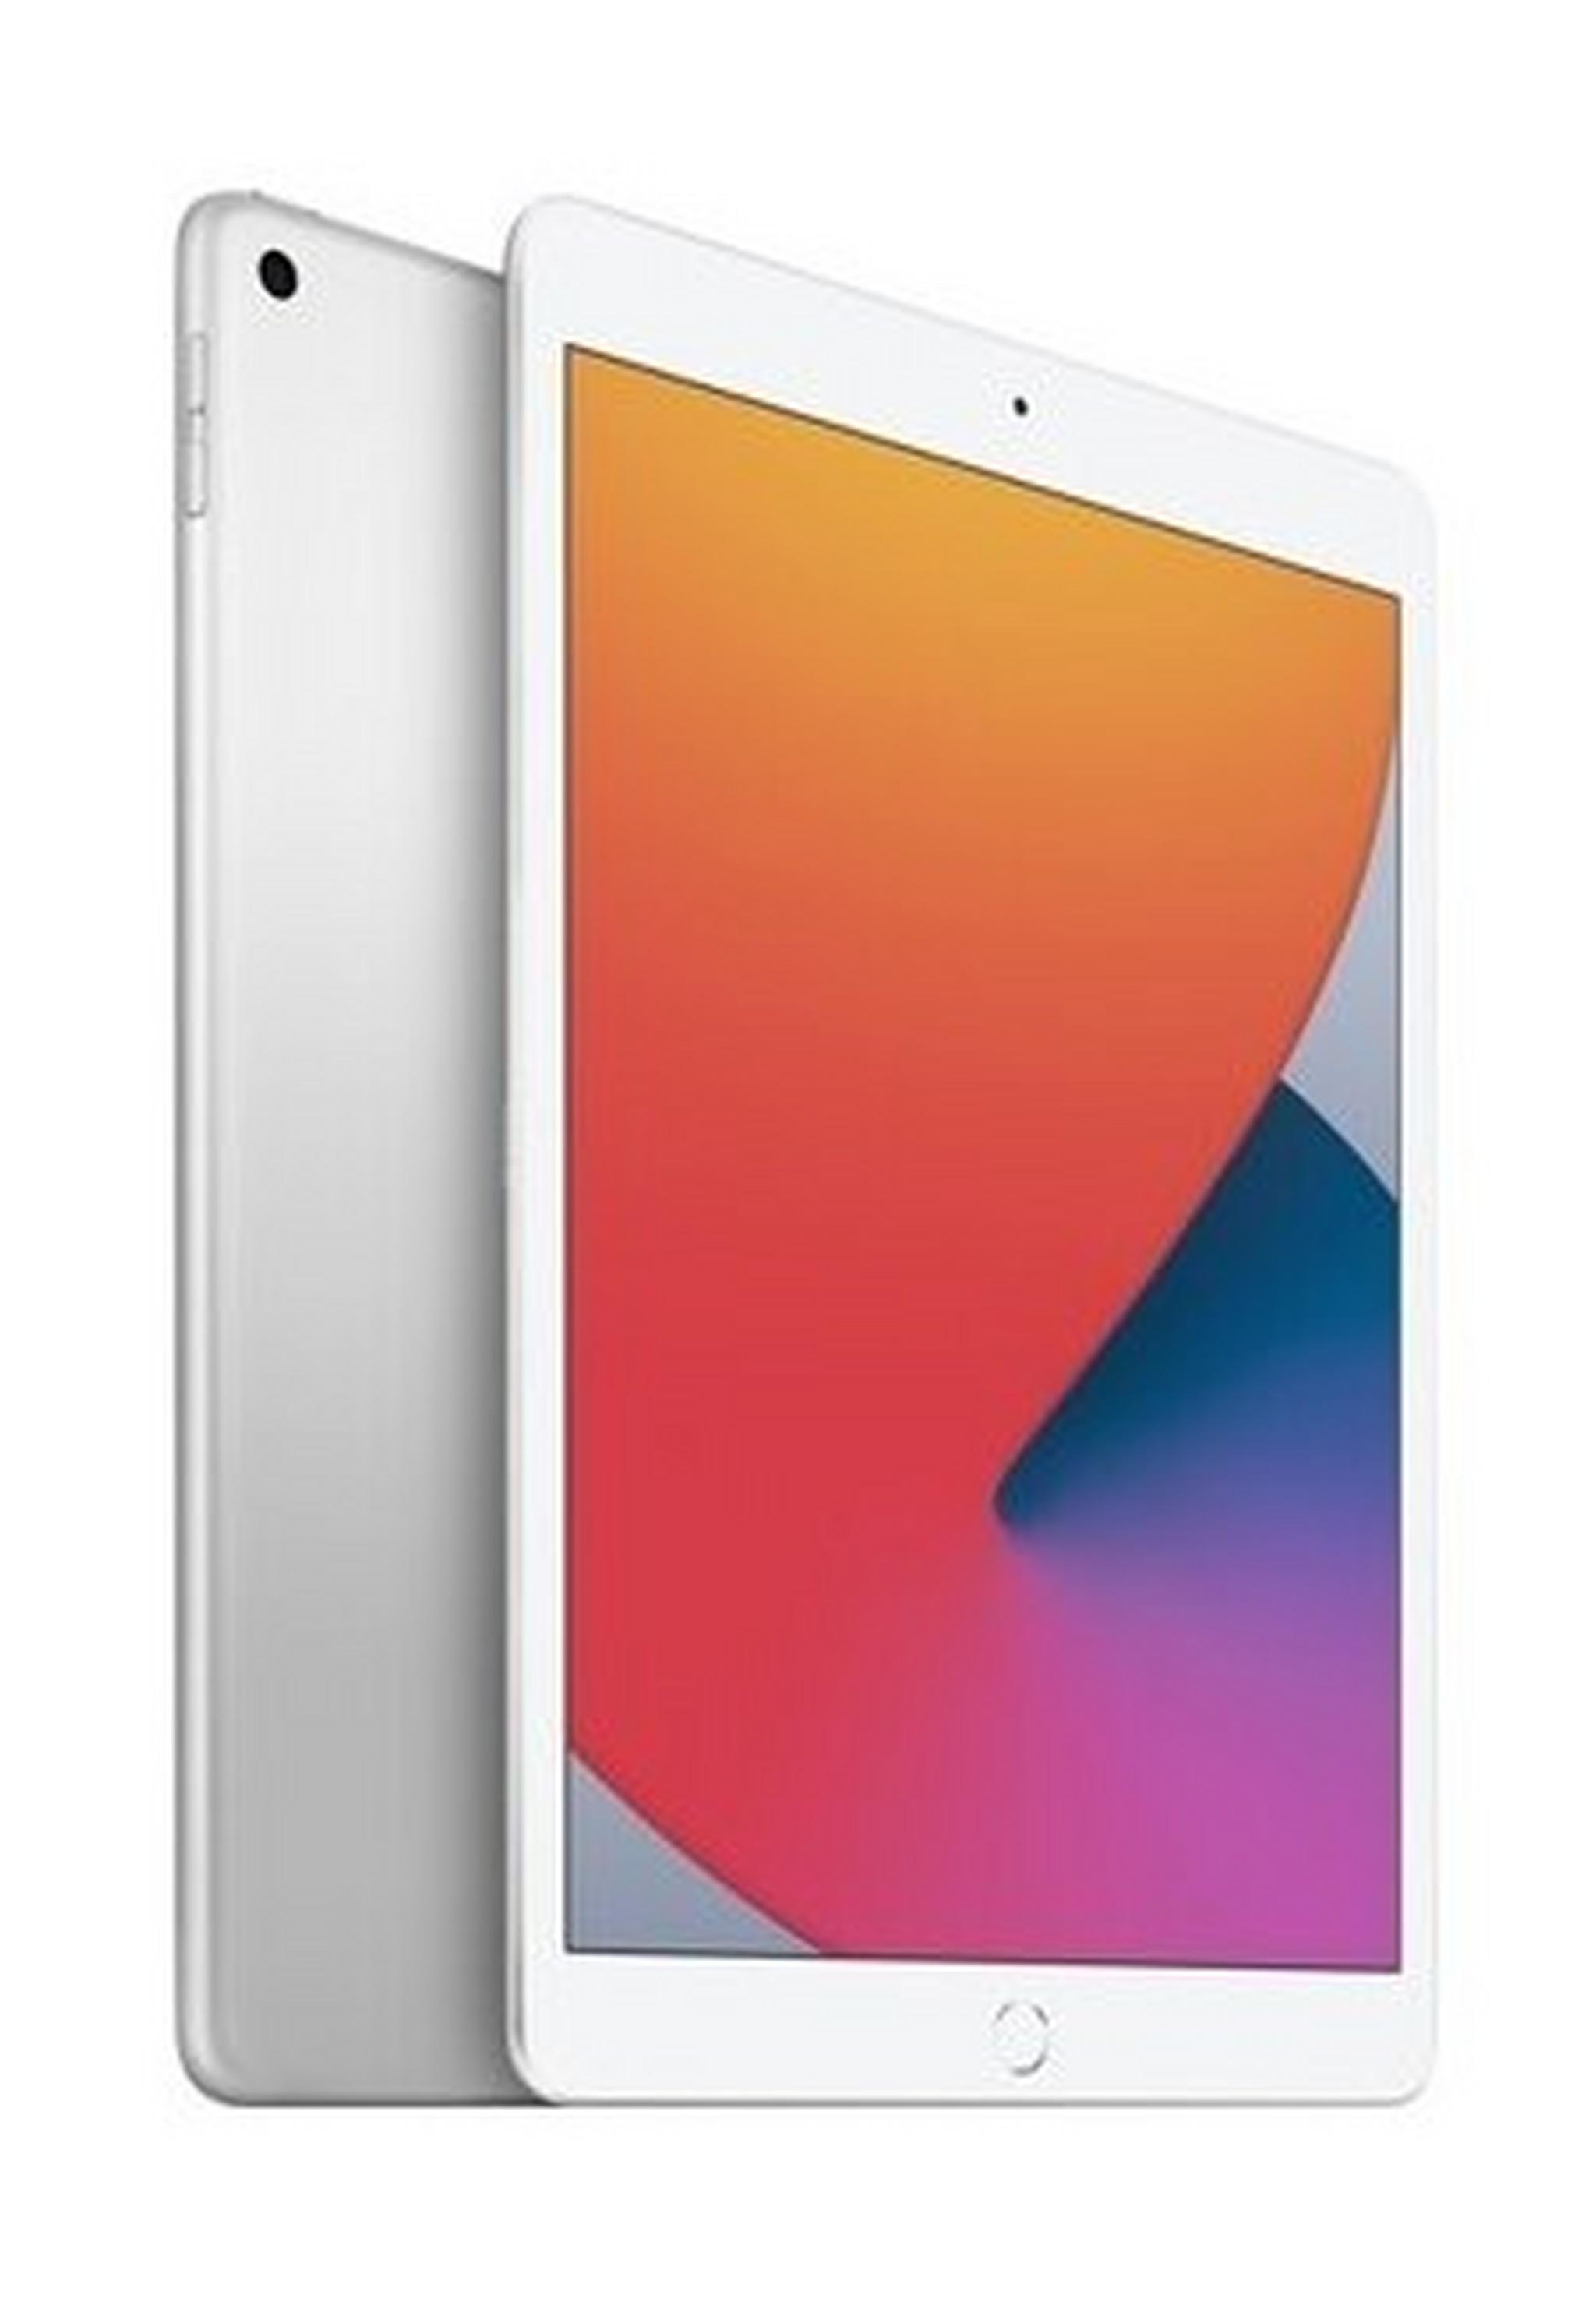 Apple iPad 7 10.2-inch 128GB Wi-Fi Only Tablet - Silver